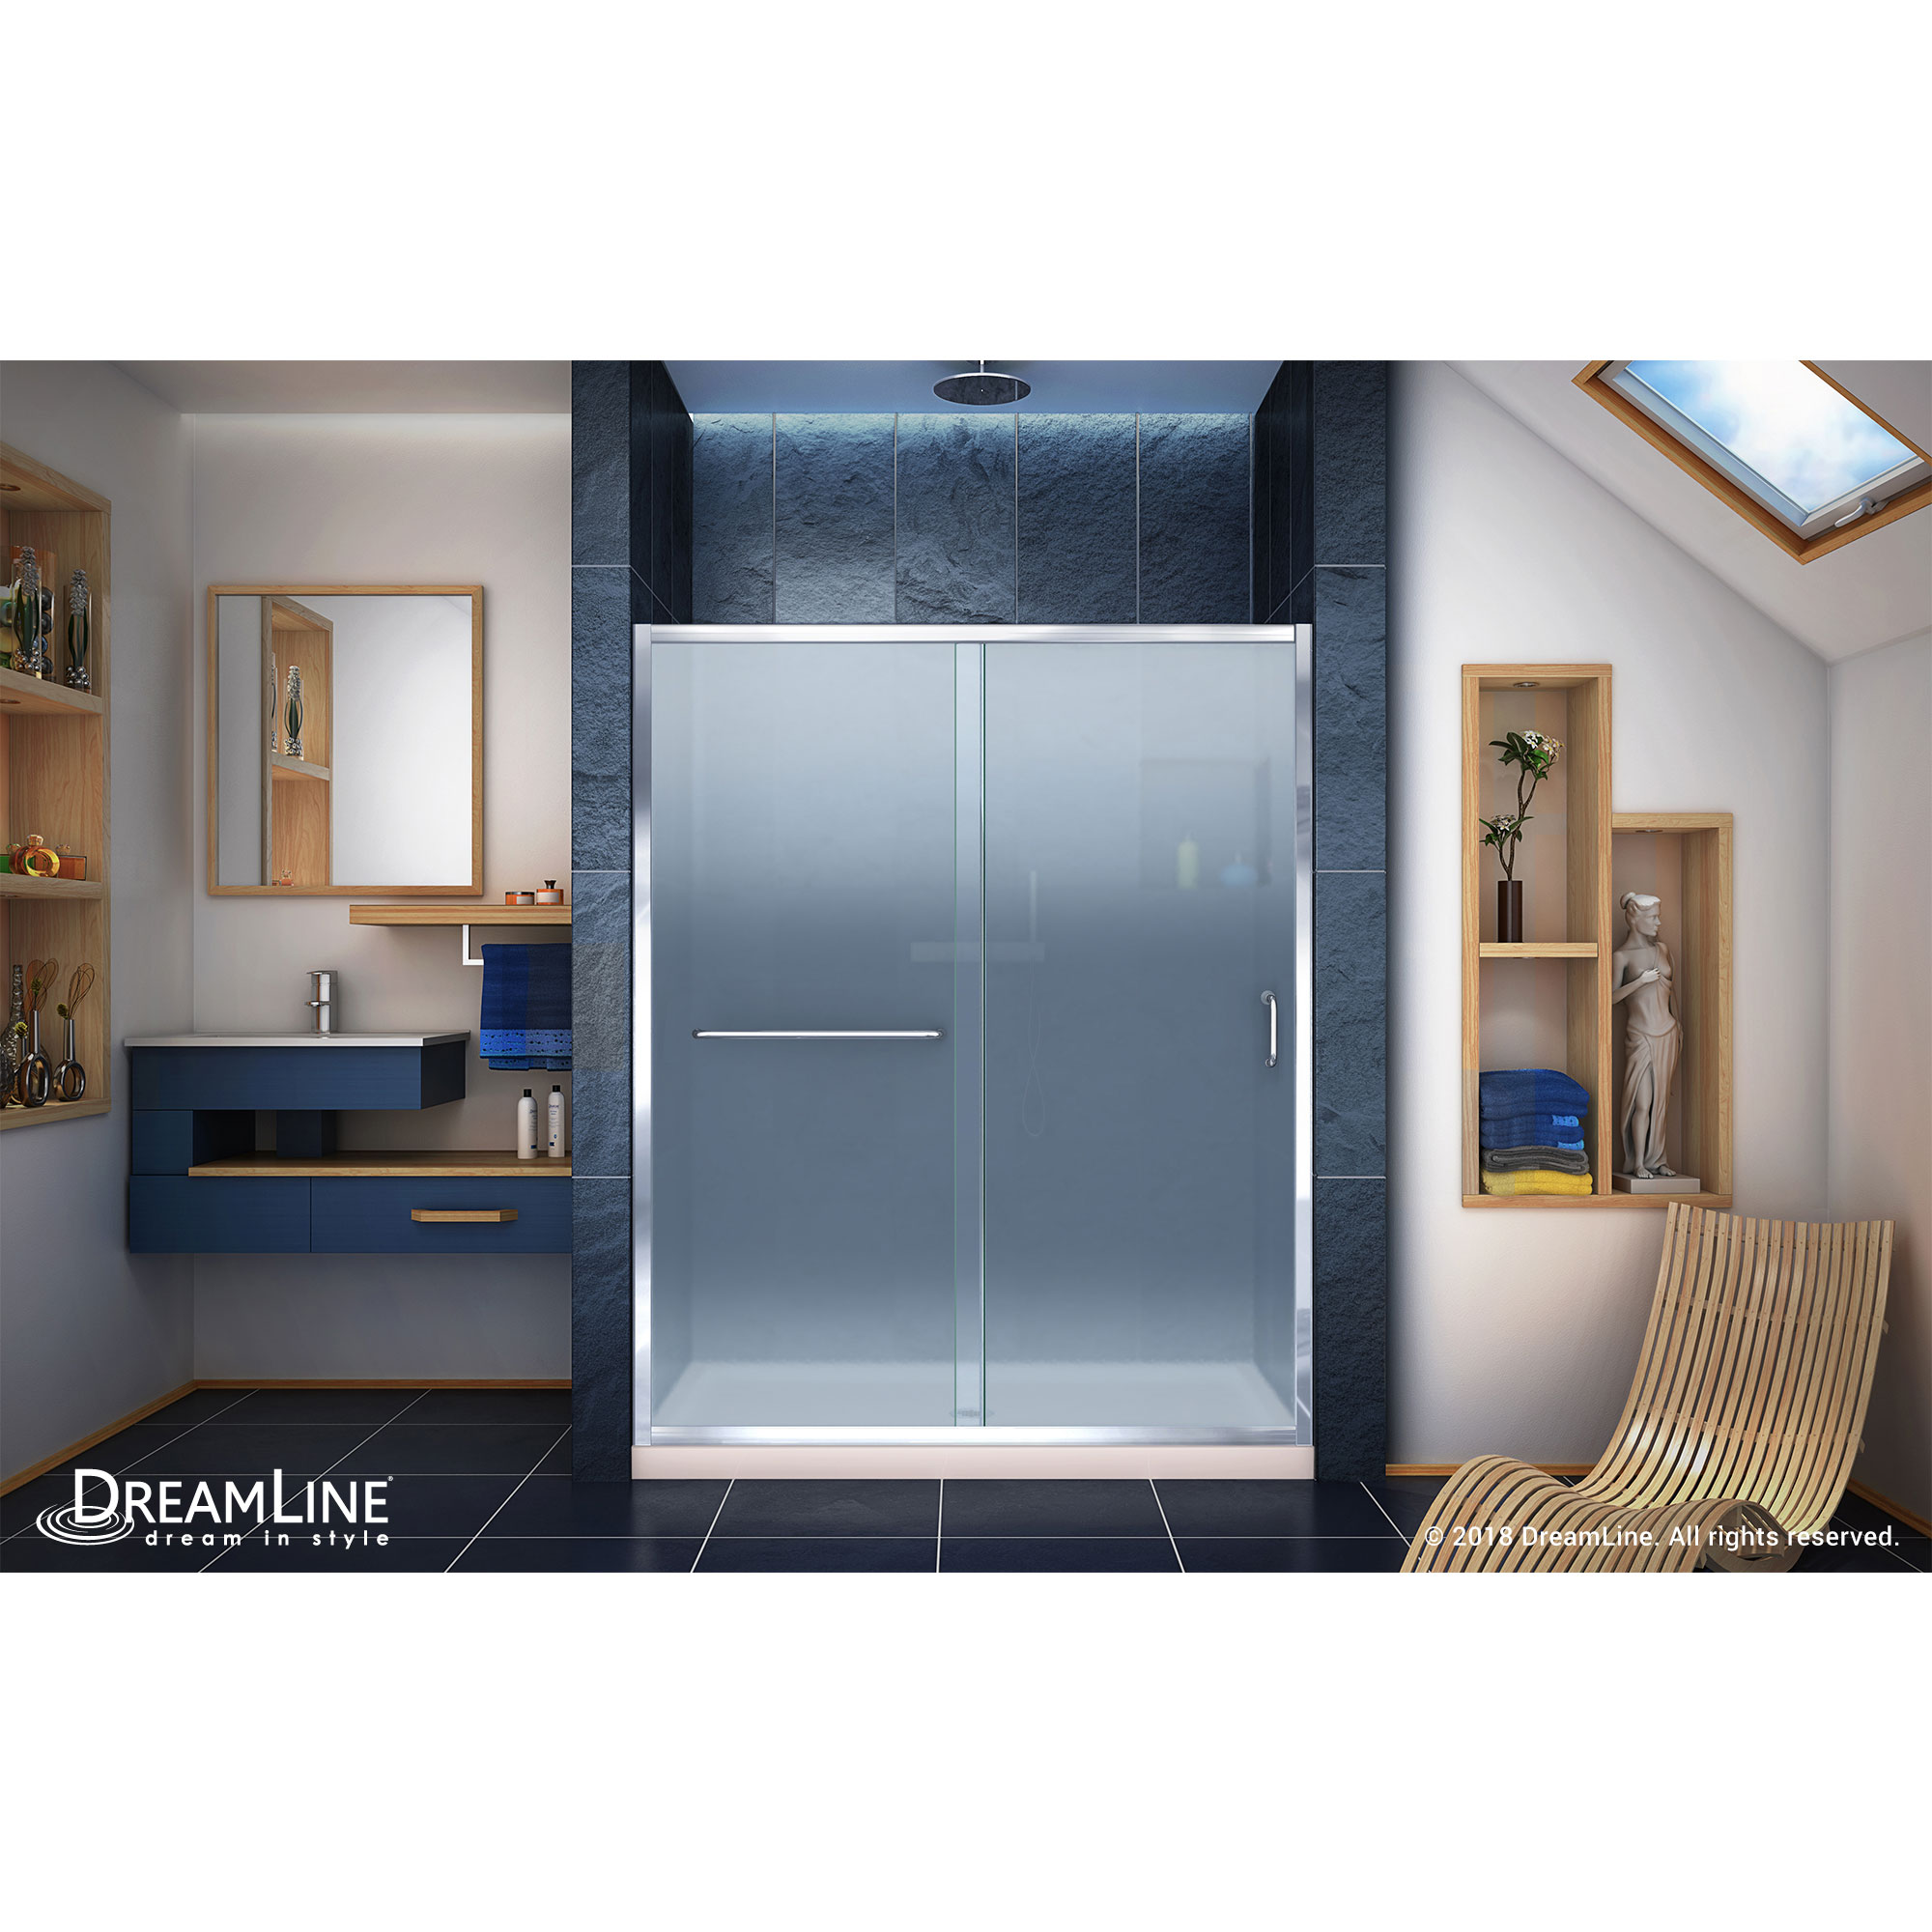 DreamLine Infinity-Z 30 in. D x 60 in. W x 74 3/4 in. H Frosted Sliding Shower Door in Chrome and Center Drain Biscuit Base